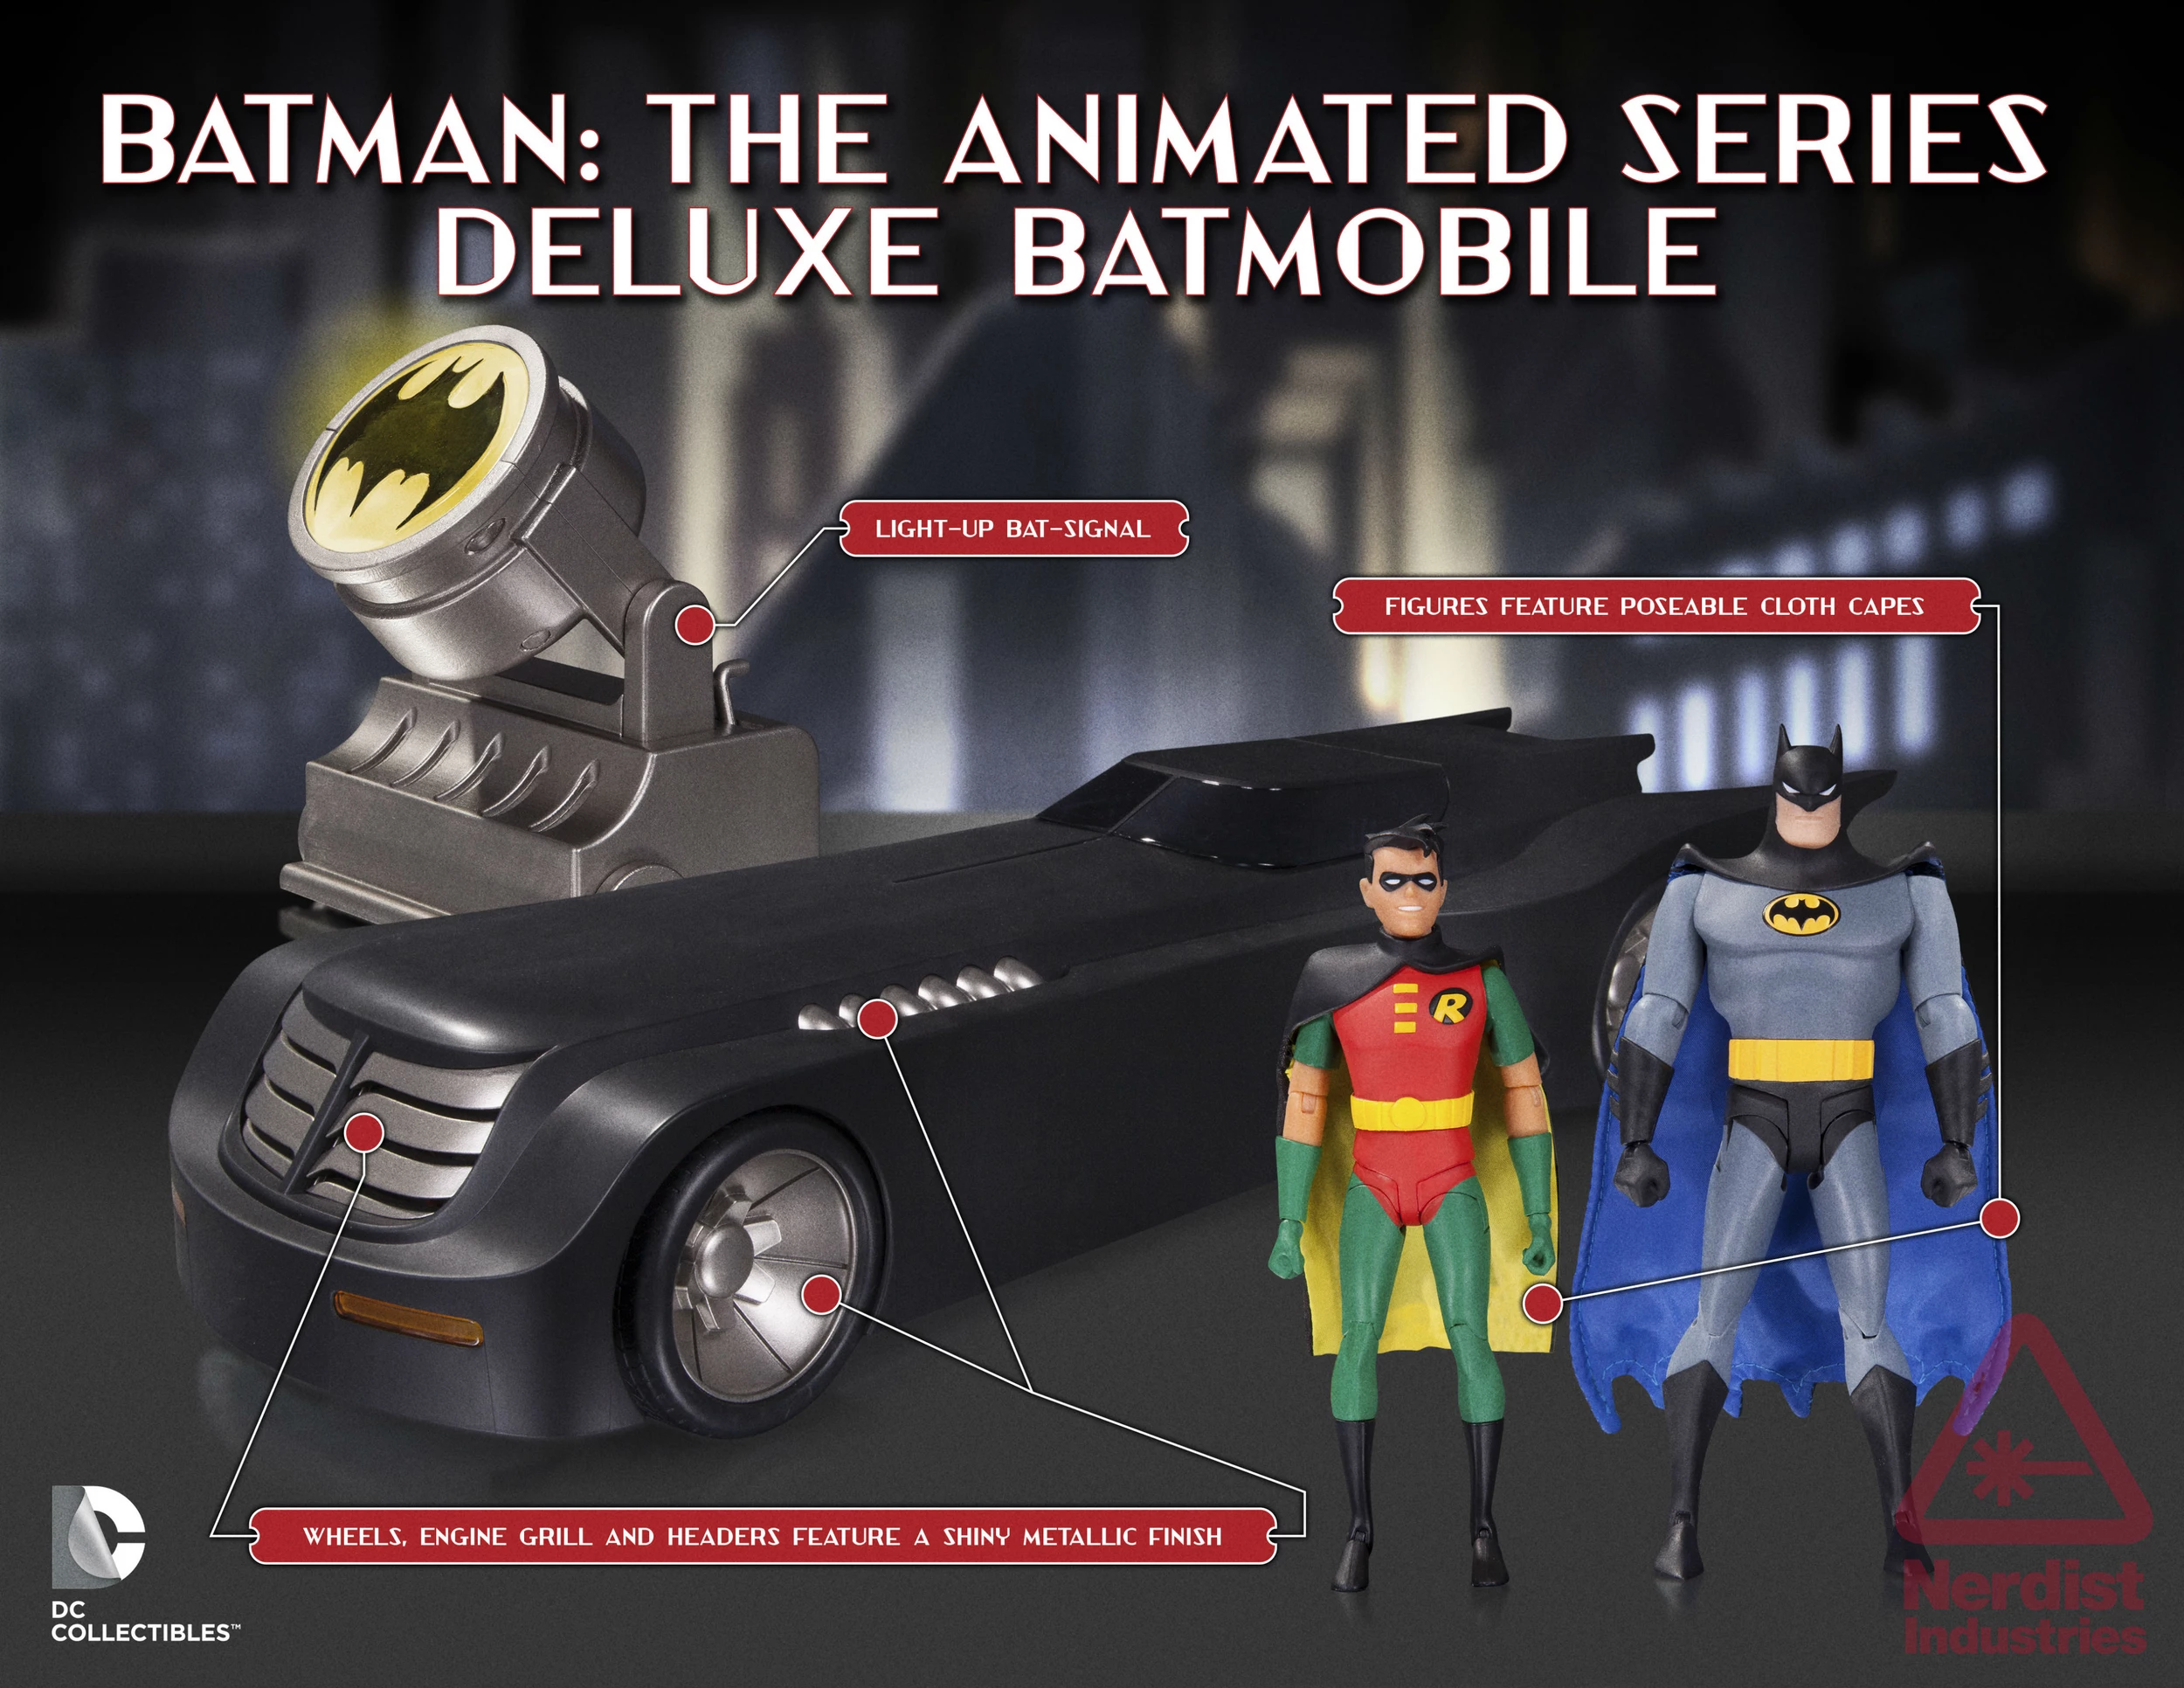 Batmobile Gets Deluxe Treatment in New Set from DC Collectibles